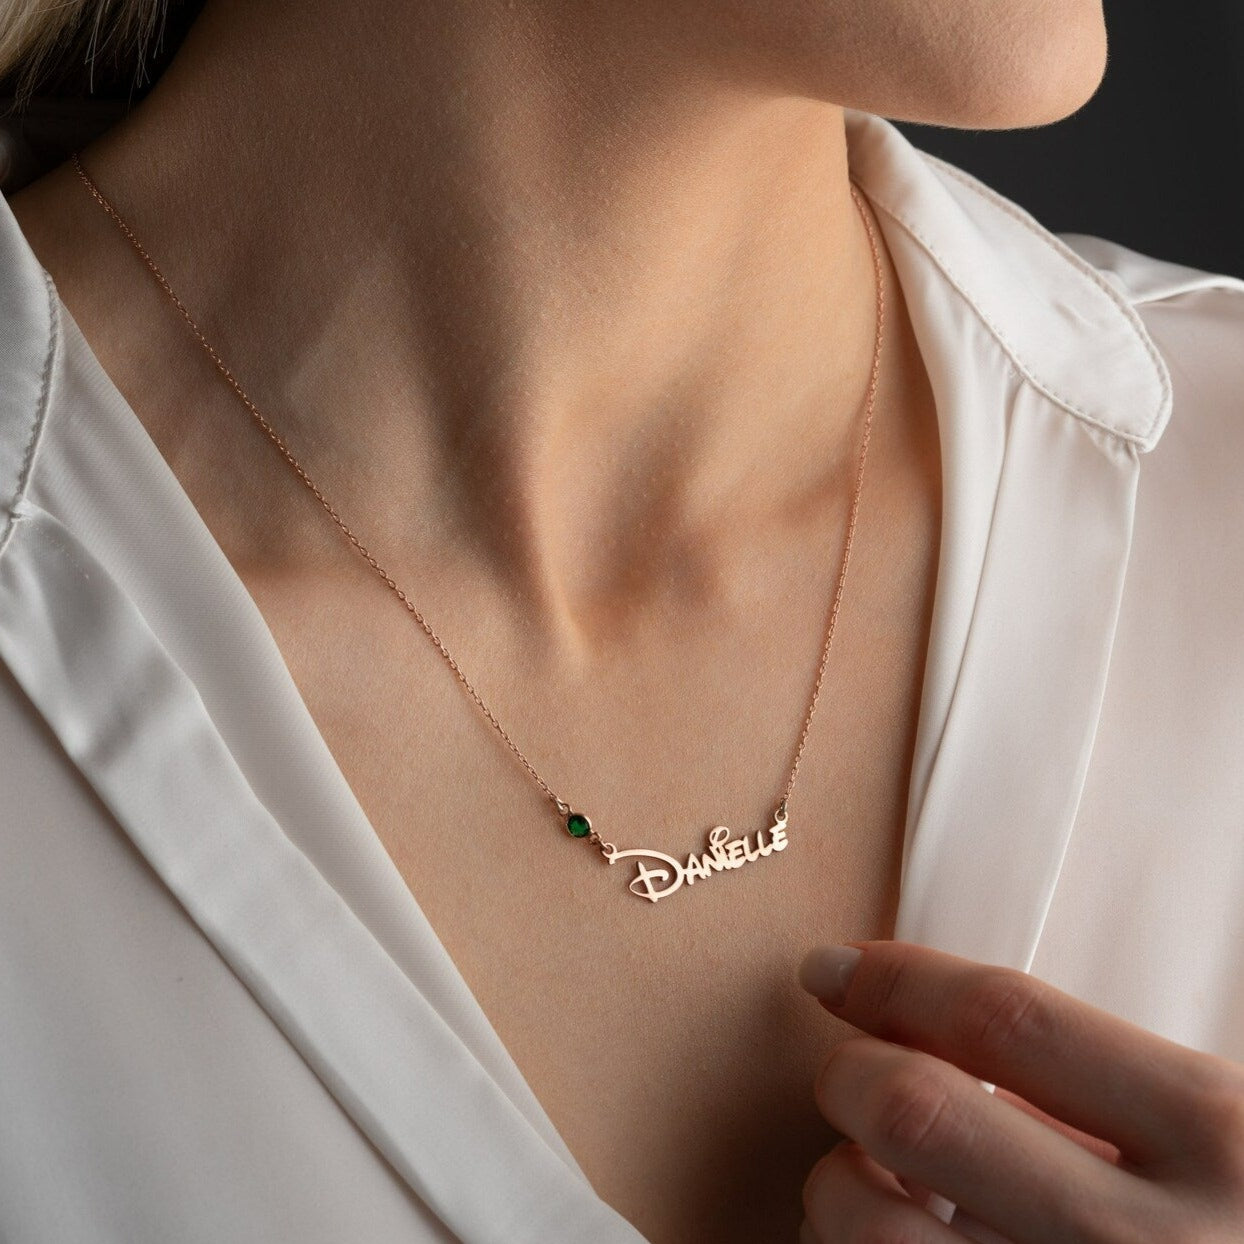 Gold name necklace for her - 18 carat gold. Locally handcrafted in Dubai. Shop high-end and luxurious personalized gifts for women. 